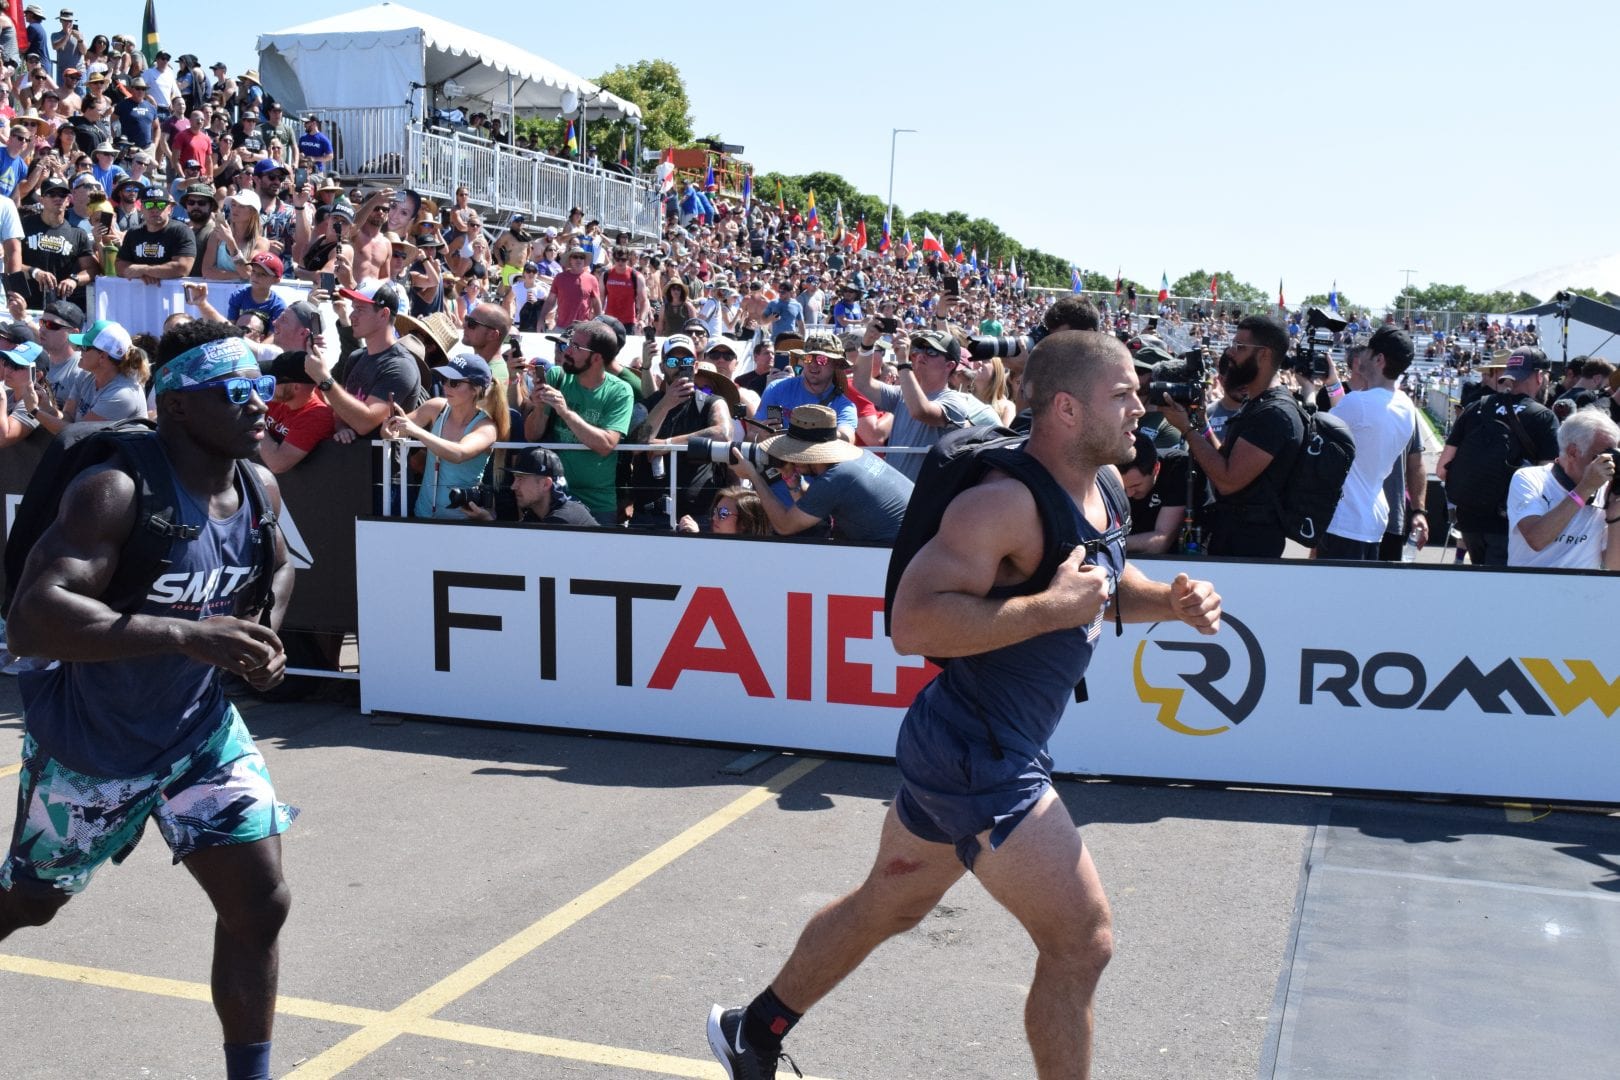 Jacob Heppner completes the Ruck Run event at the 2019 CrossFit Games.